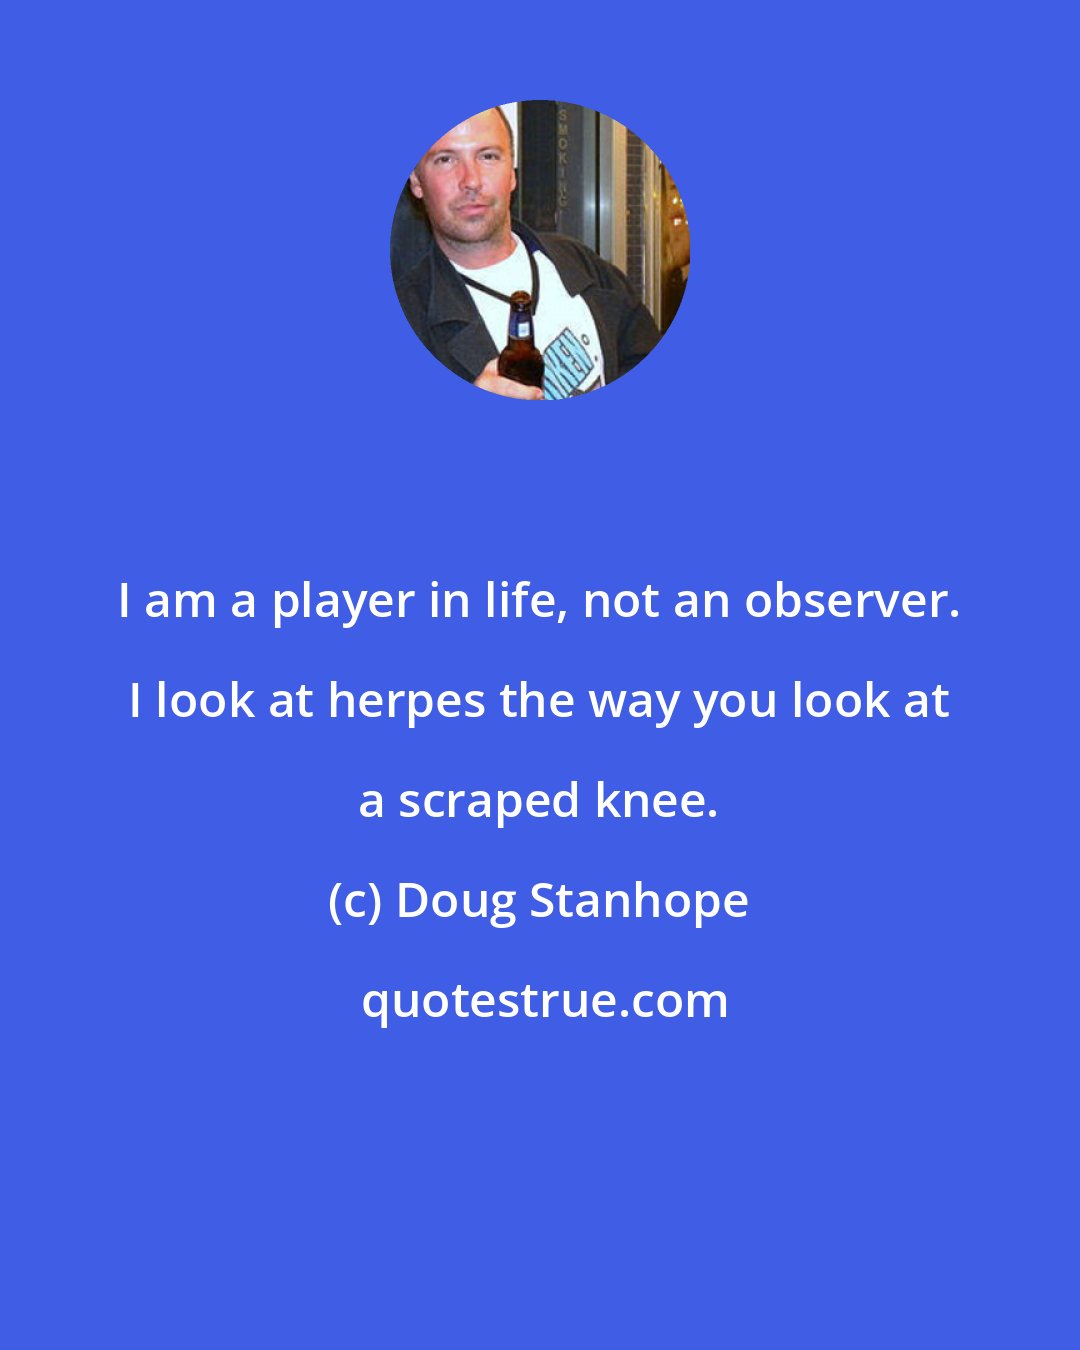 Doug Stanhope: I am a player in life, not an observer. I look at herpes the way you look at a scraped knee.